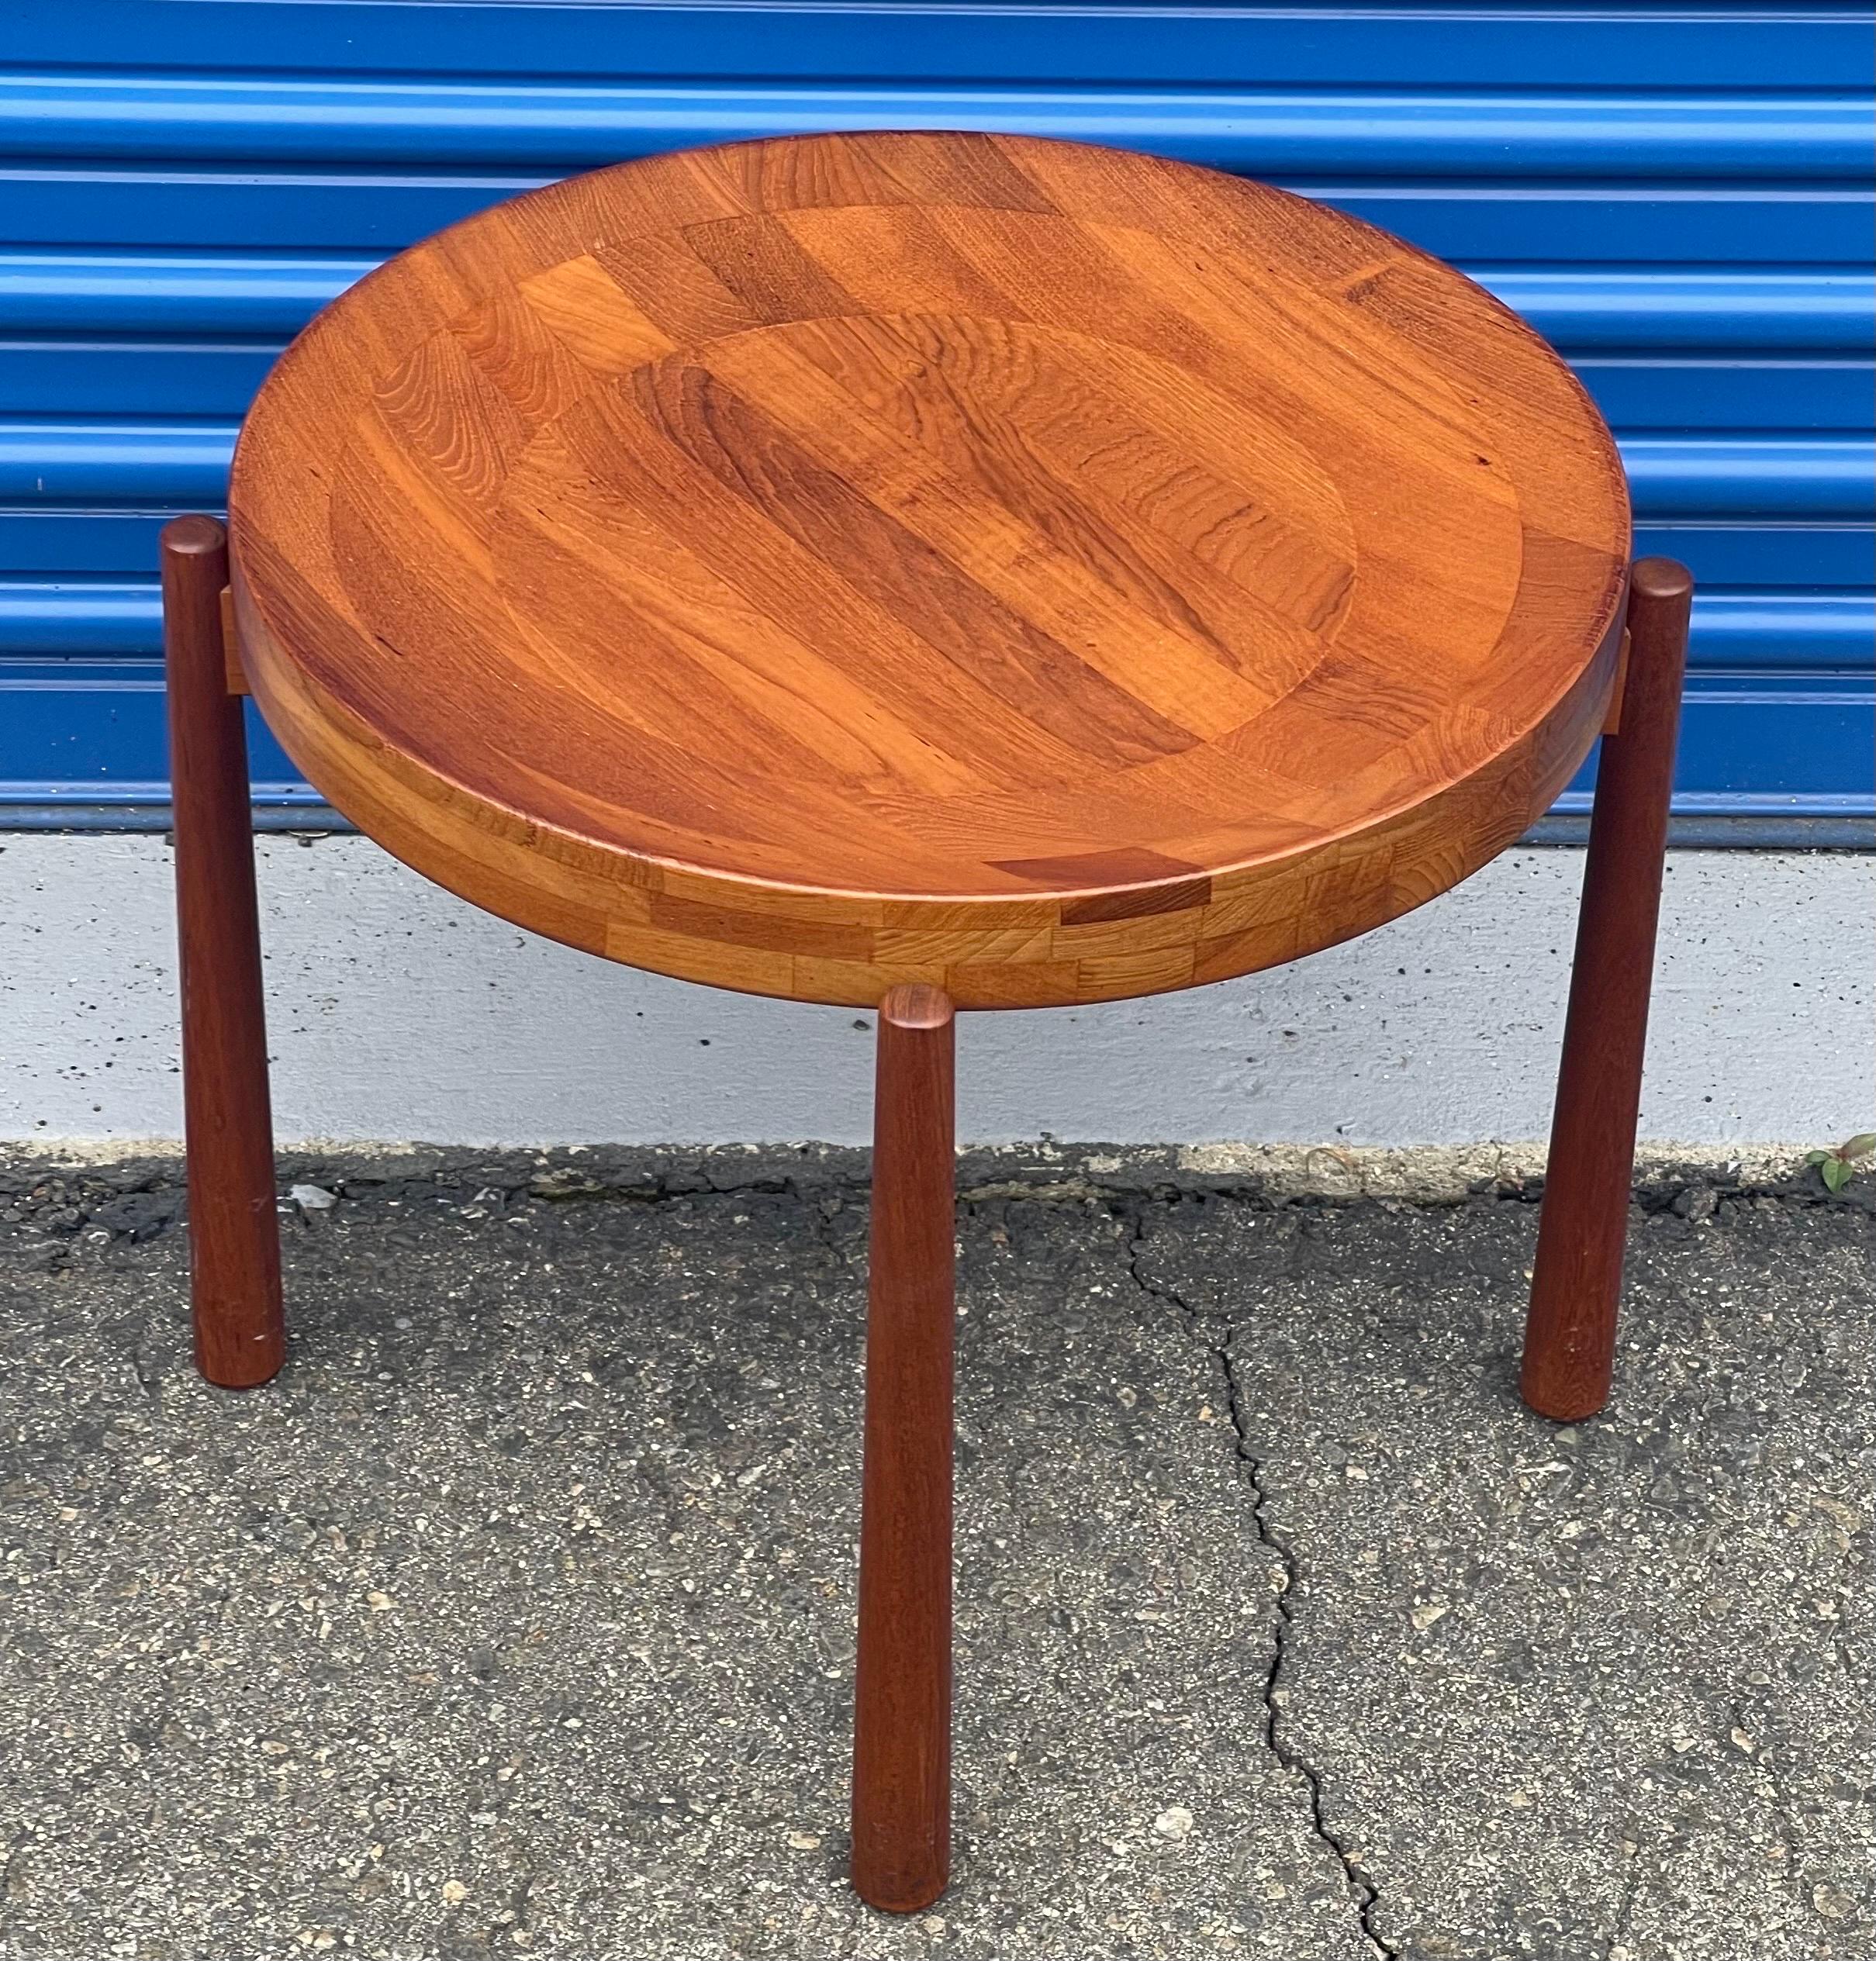 Pair of Teak Tray Side Tables Attributed to Jens Quistgaard for DUX of Sweden For Sale 8